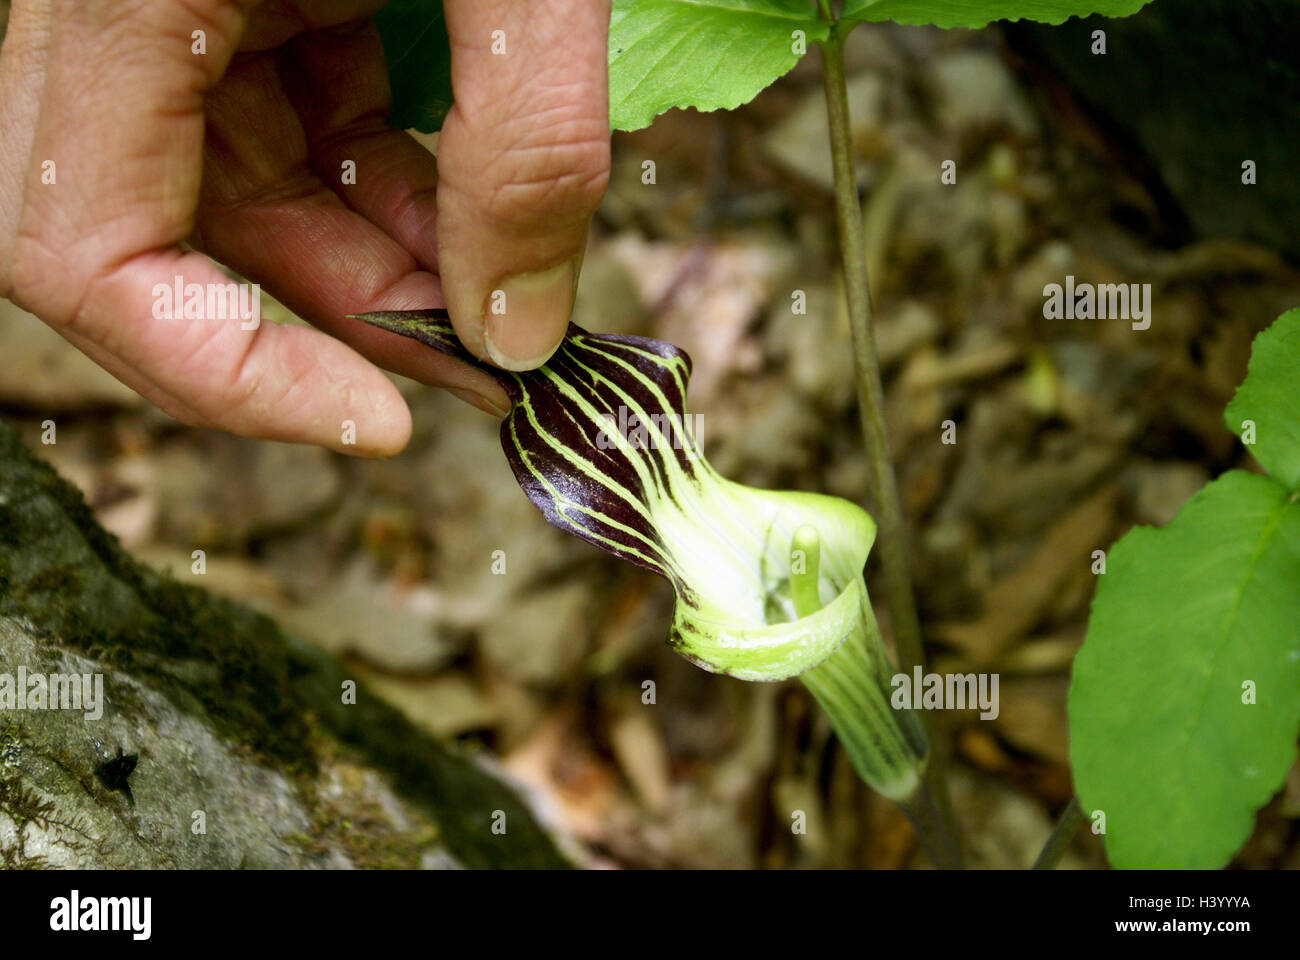 Woman touching A Jack-In-The-Pulpit plant (Arisaema triphyllum) Stock Photo